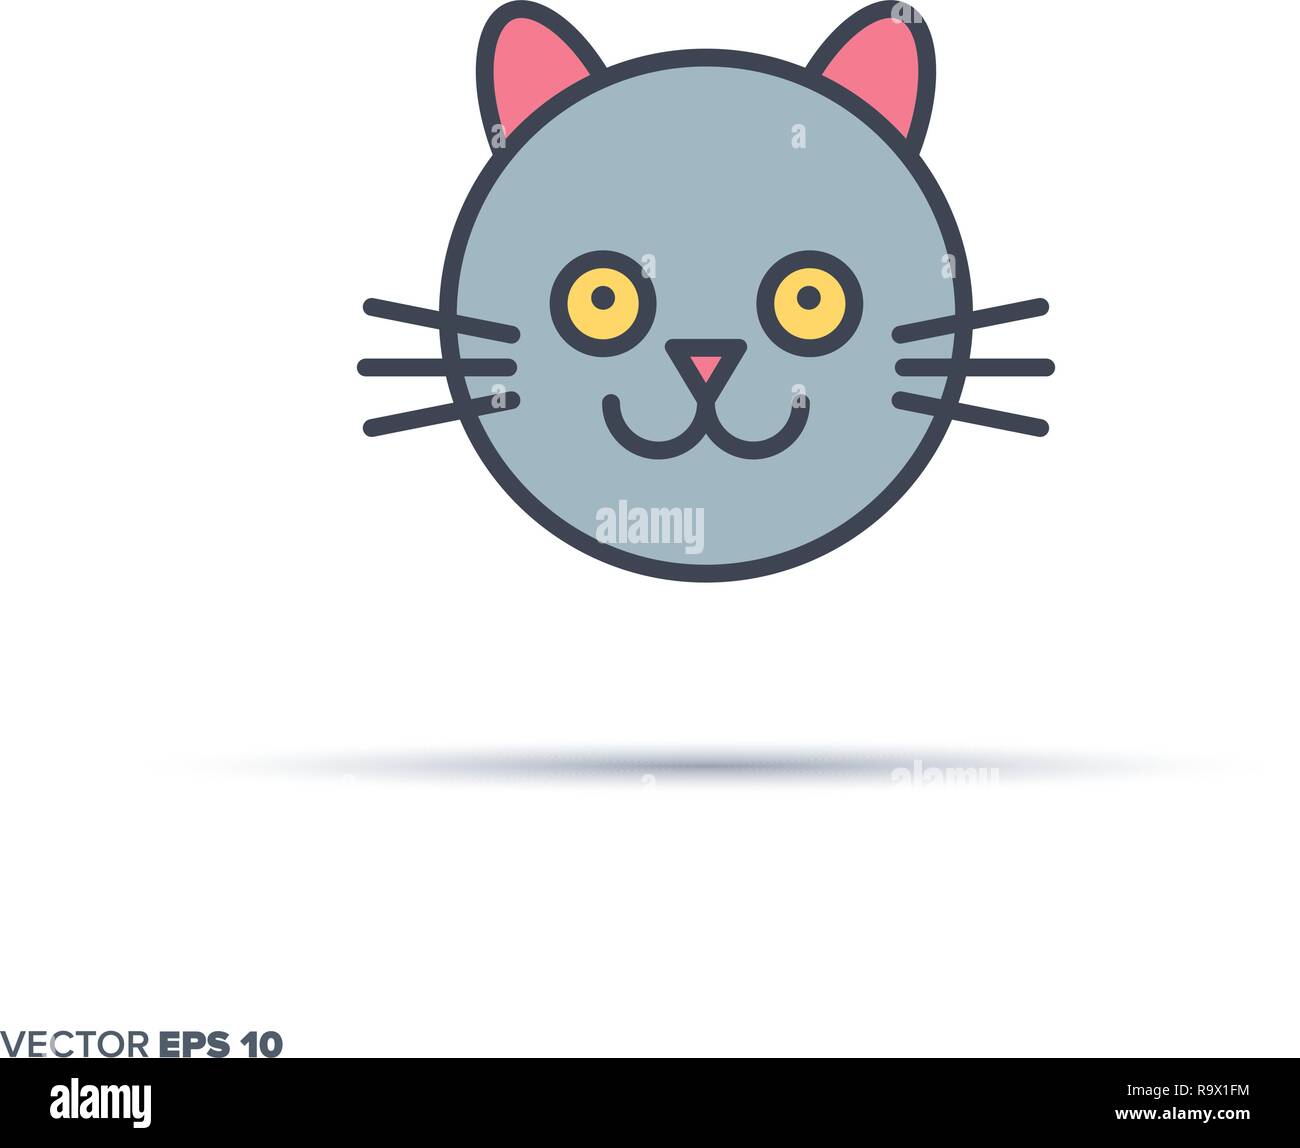 Free Vectors  Cat face icon illustration material_vector